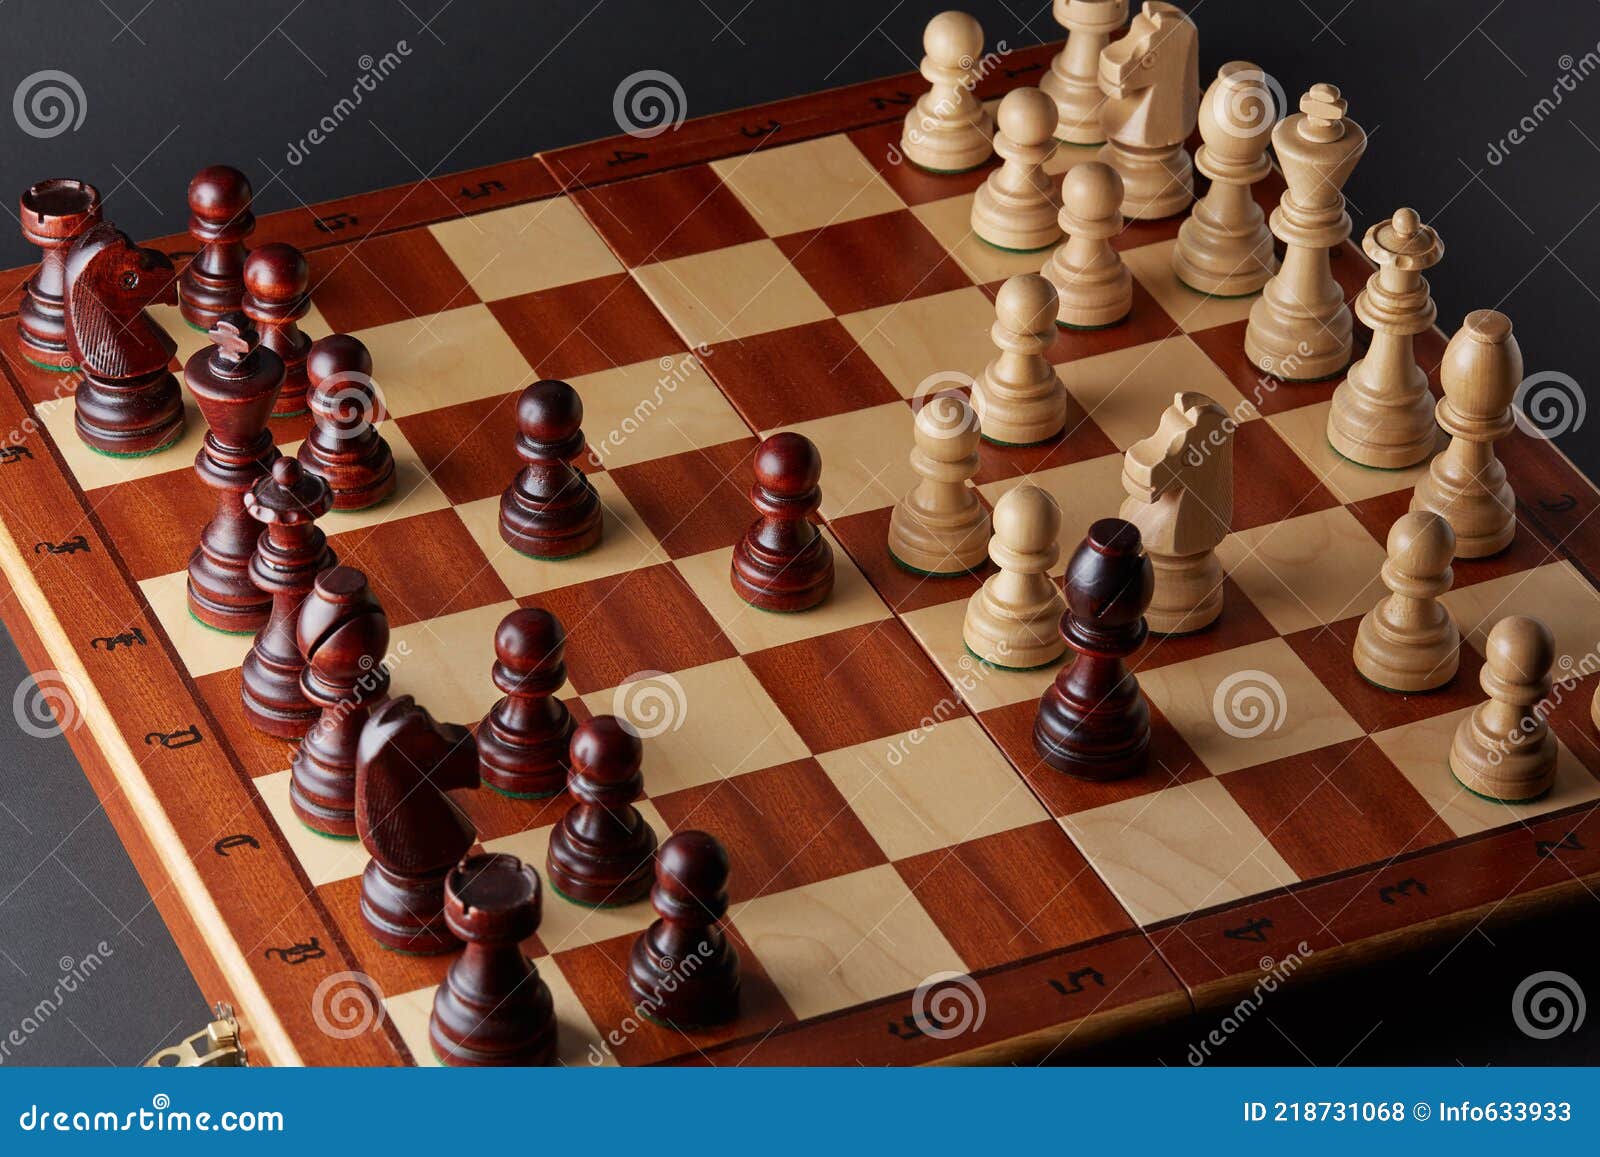 Game Of Chess Queens Gambit Opening Stock Photo - Download Image Now -  Chess, Beginnings, Opening - iStock